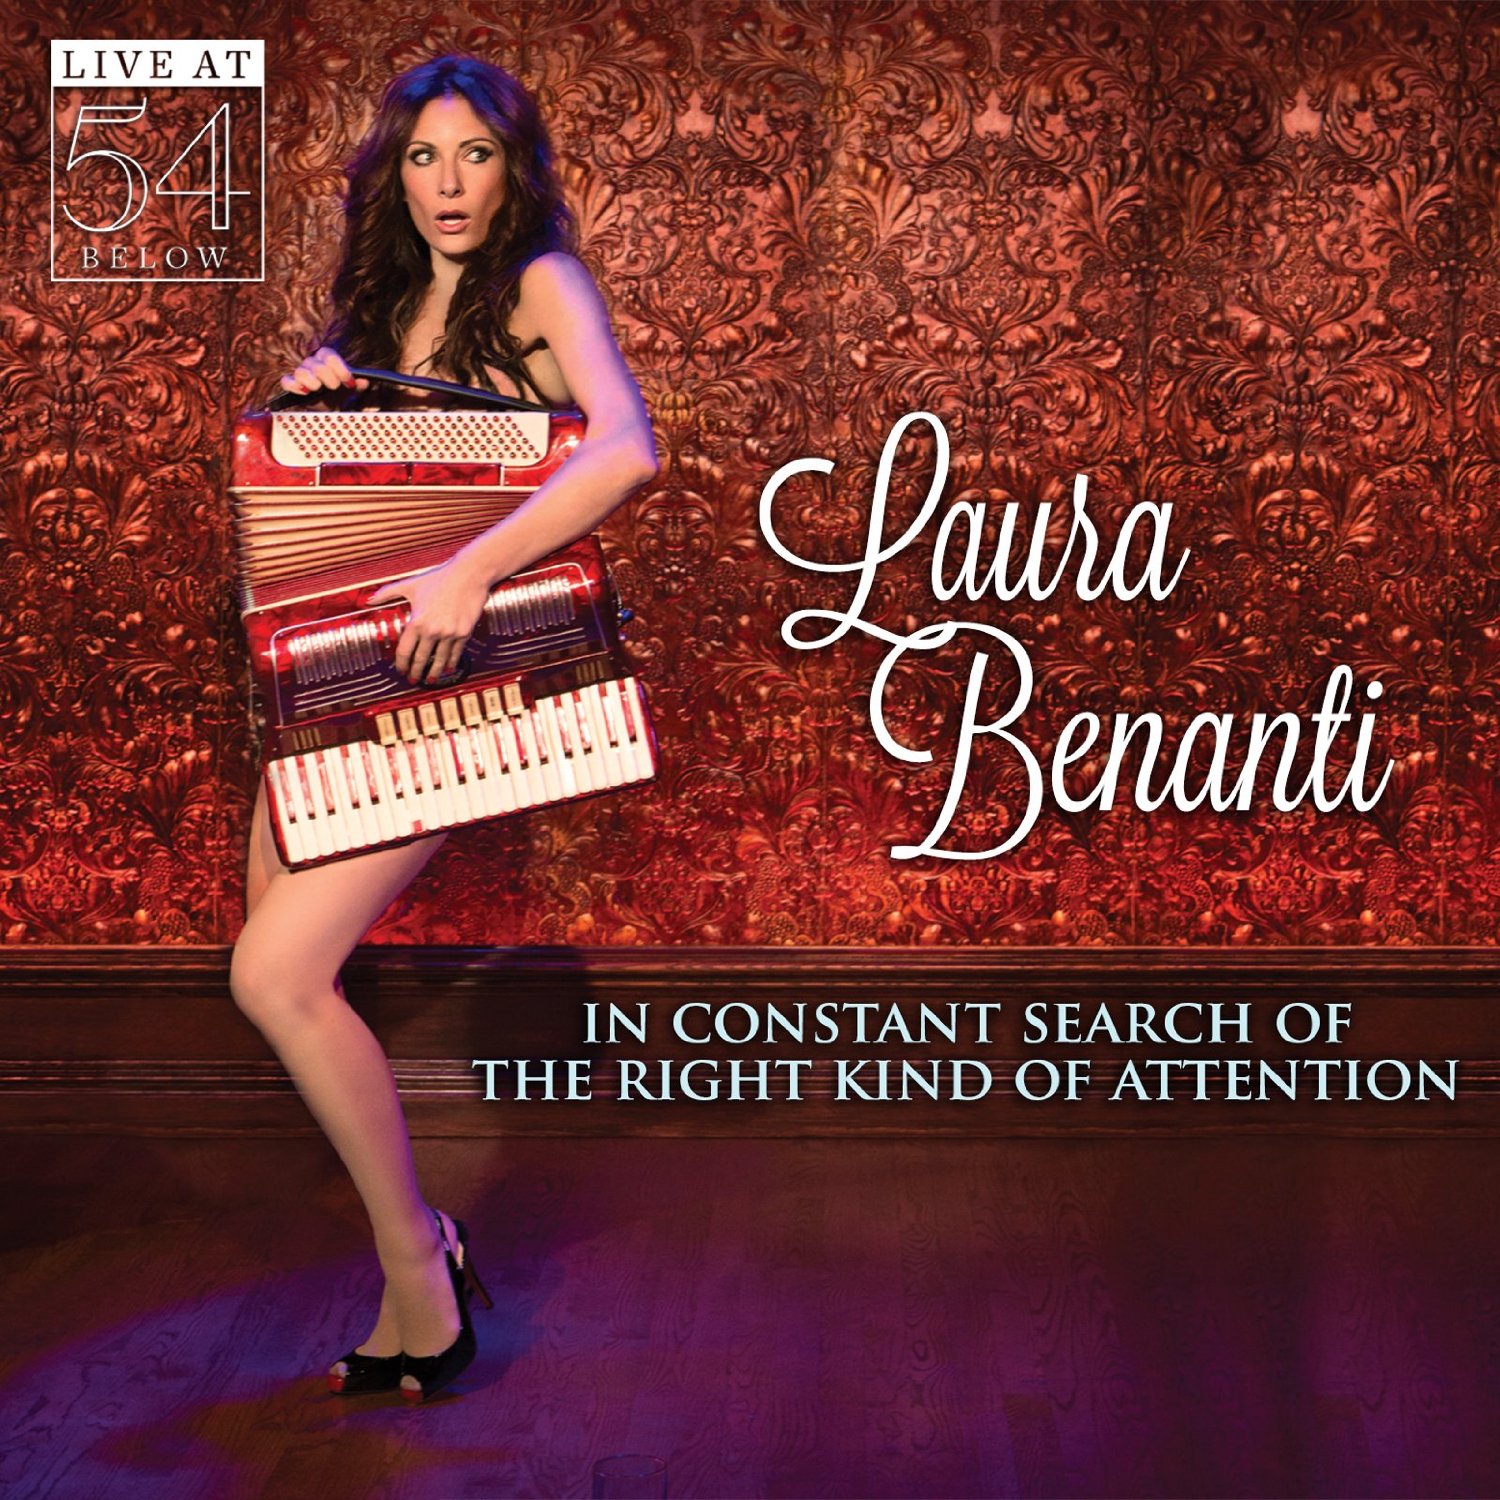 Laura Benanti: ‘In Constant Search of the Right Kind of Attention’